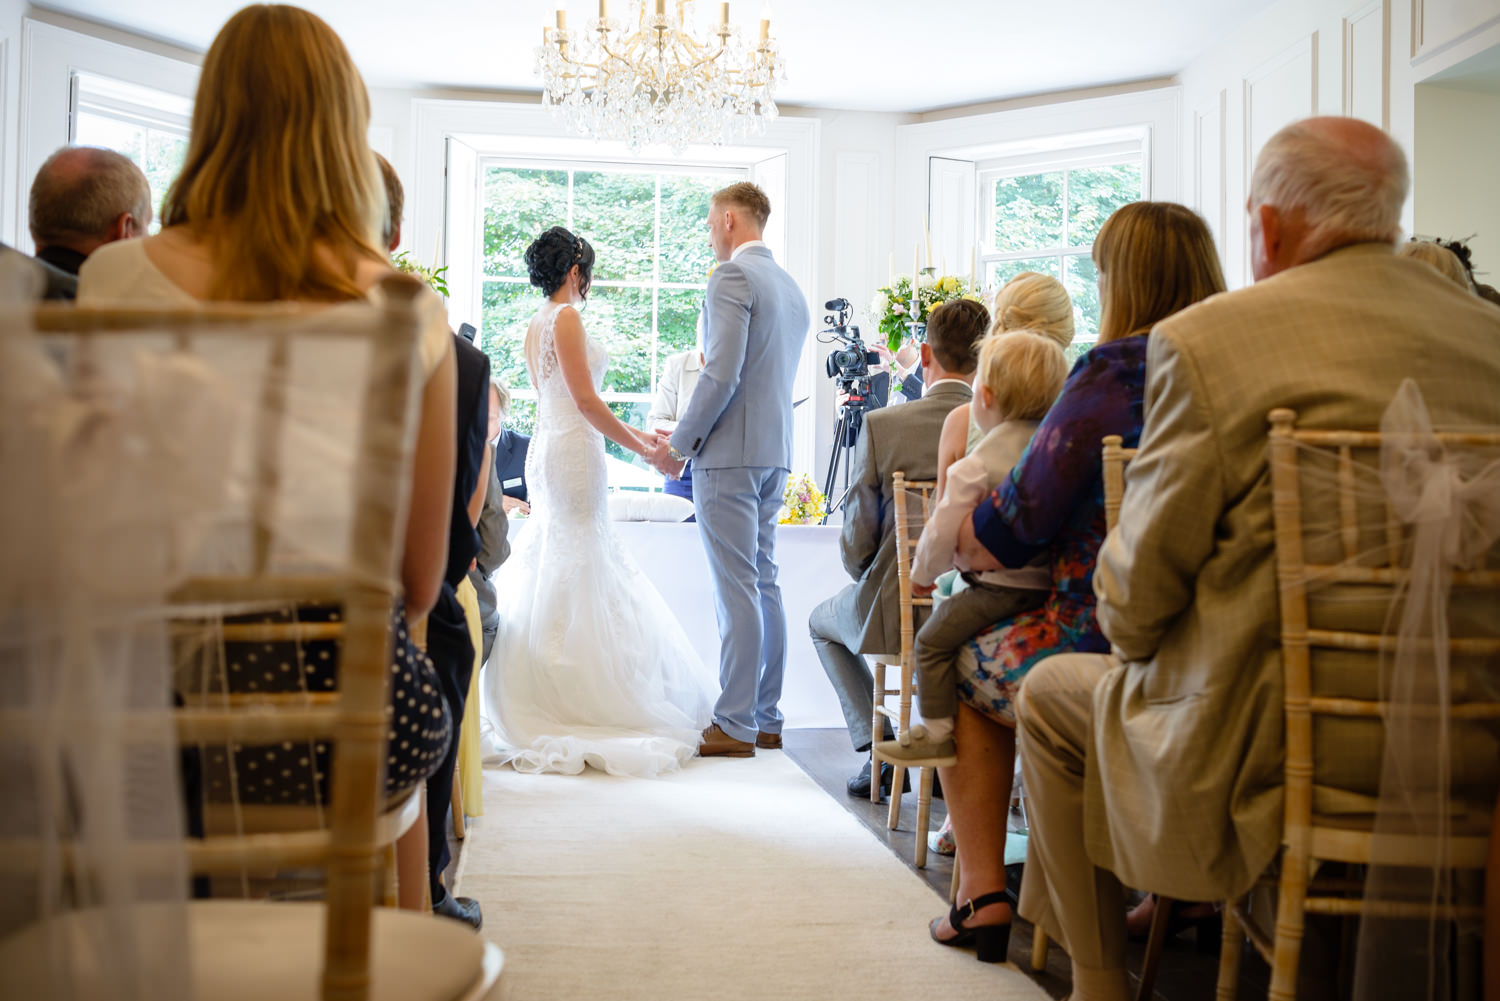 The Old Wedding ceremony at the Old Vicarage Boutique Hotel Wedding 